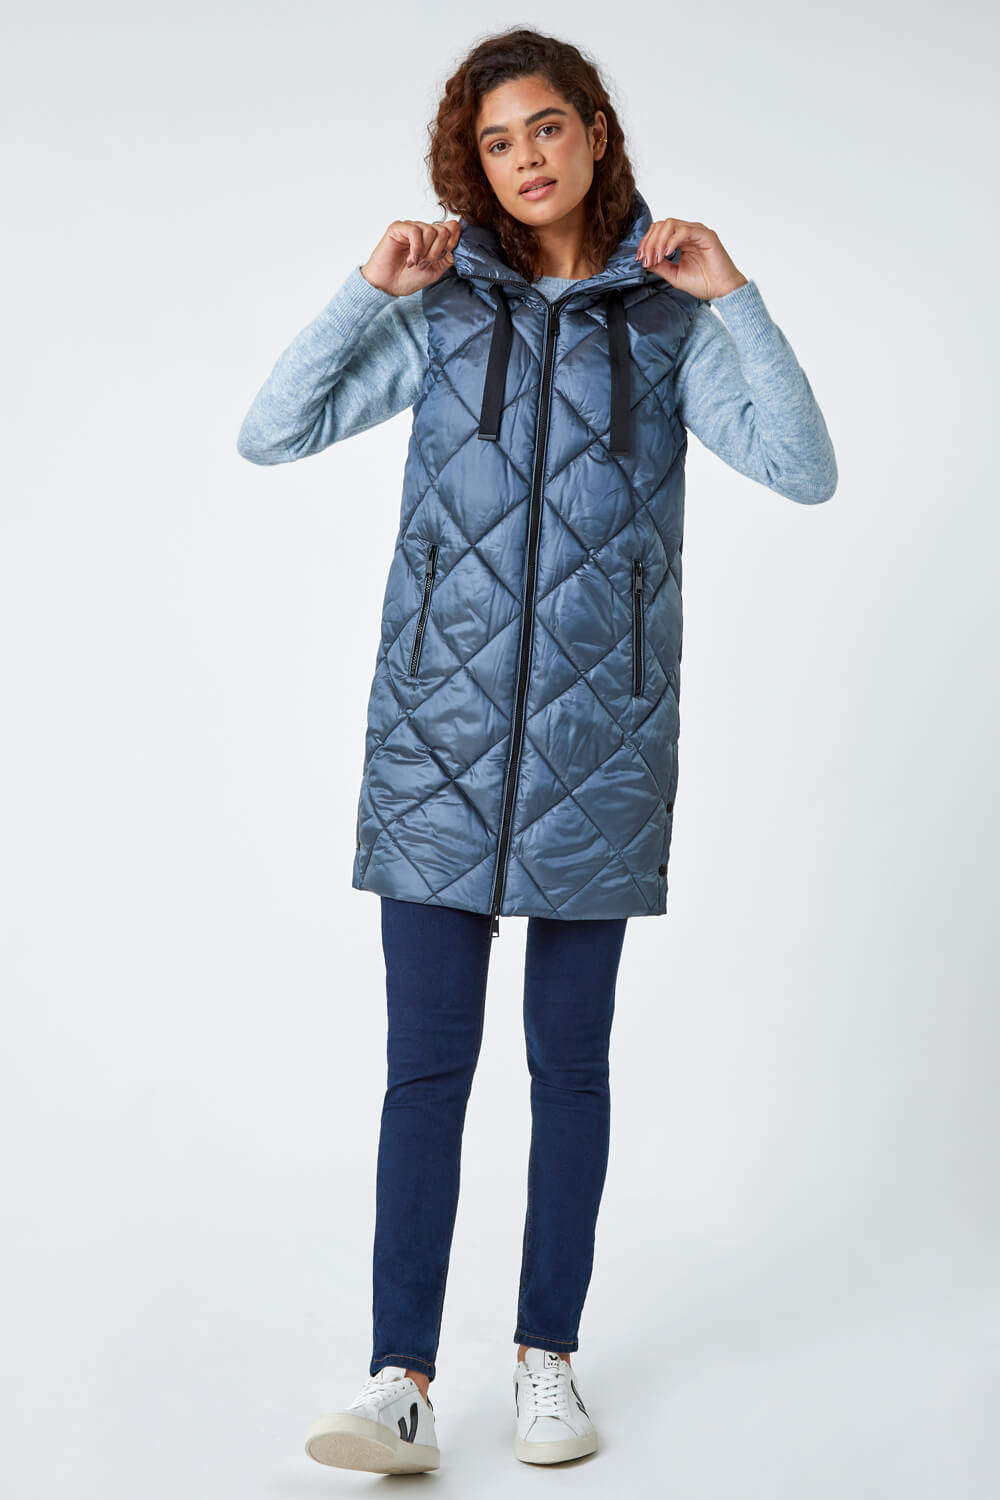 Steel Blue Diamond Quilted Padded Gilet, Image 2 of 5